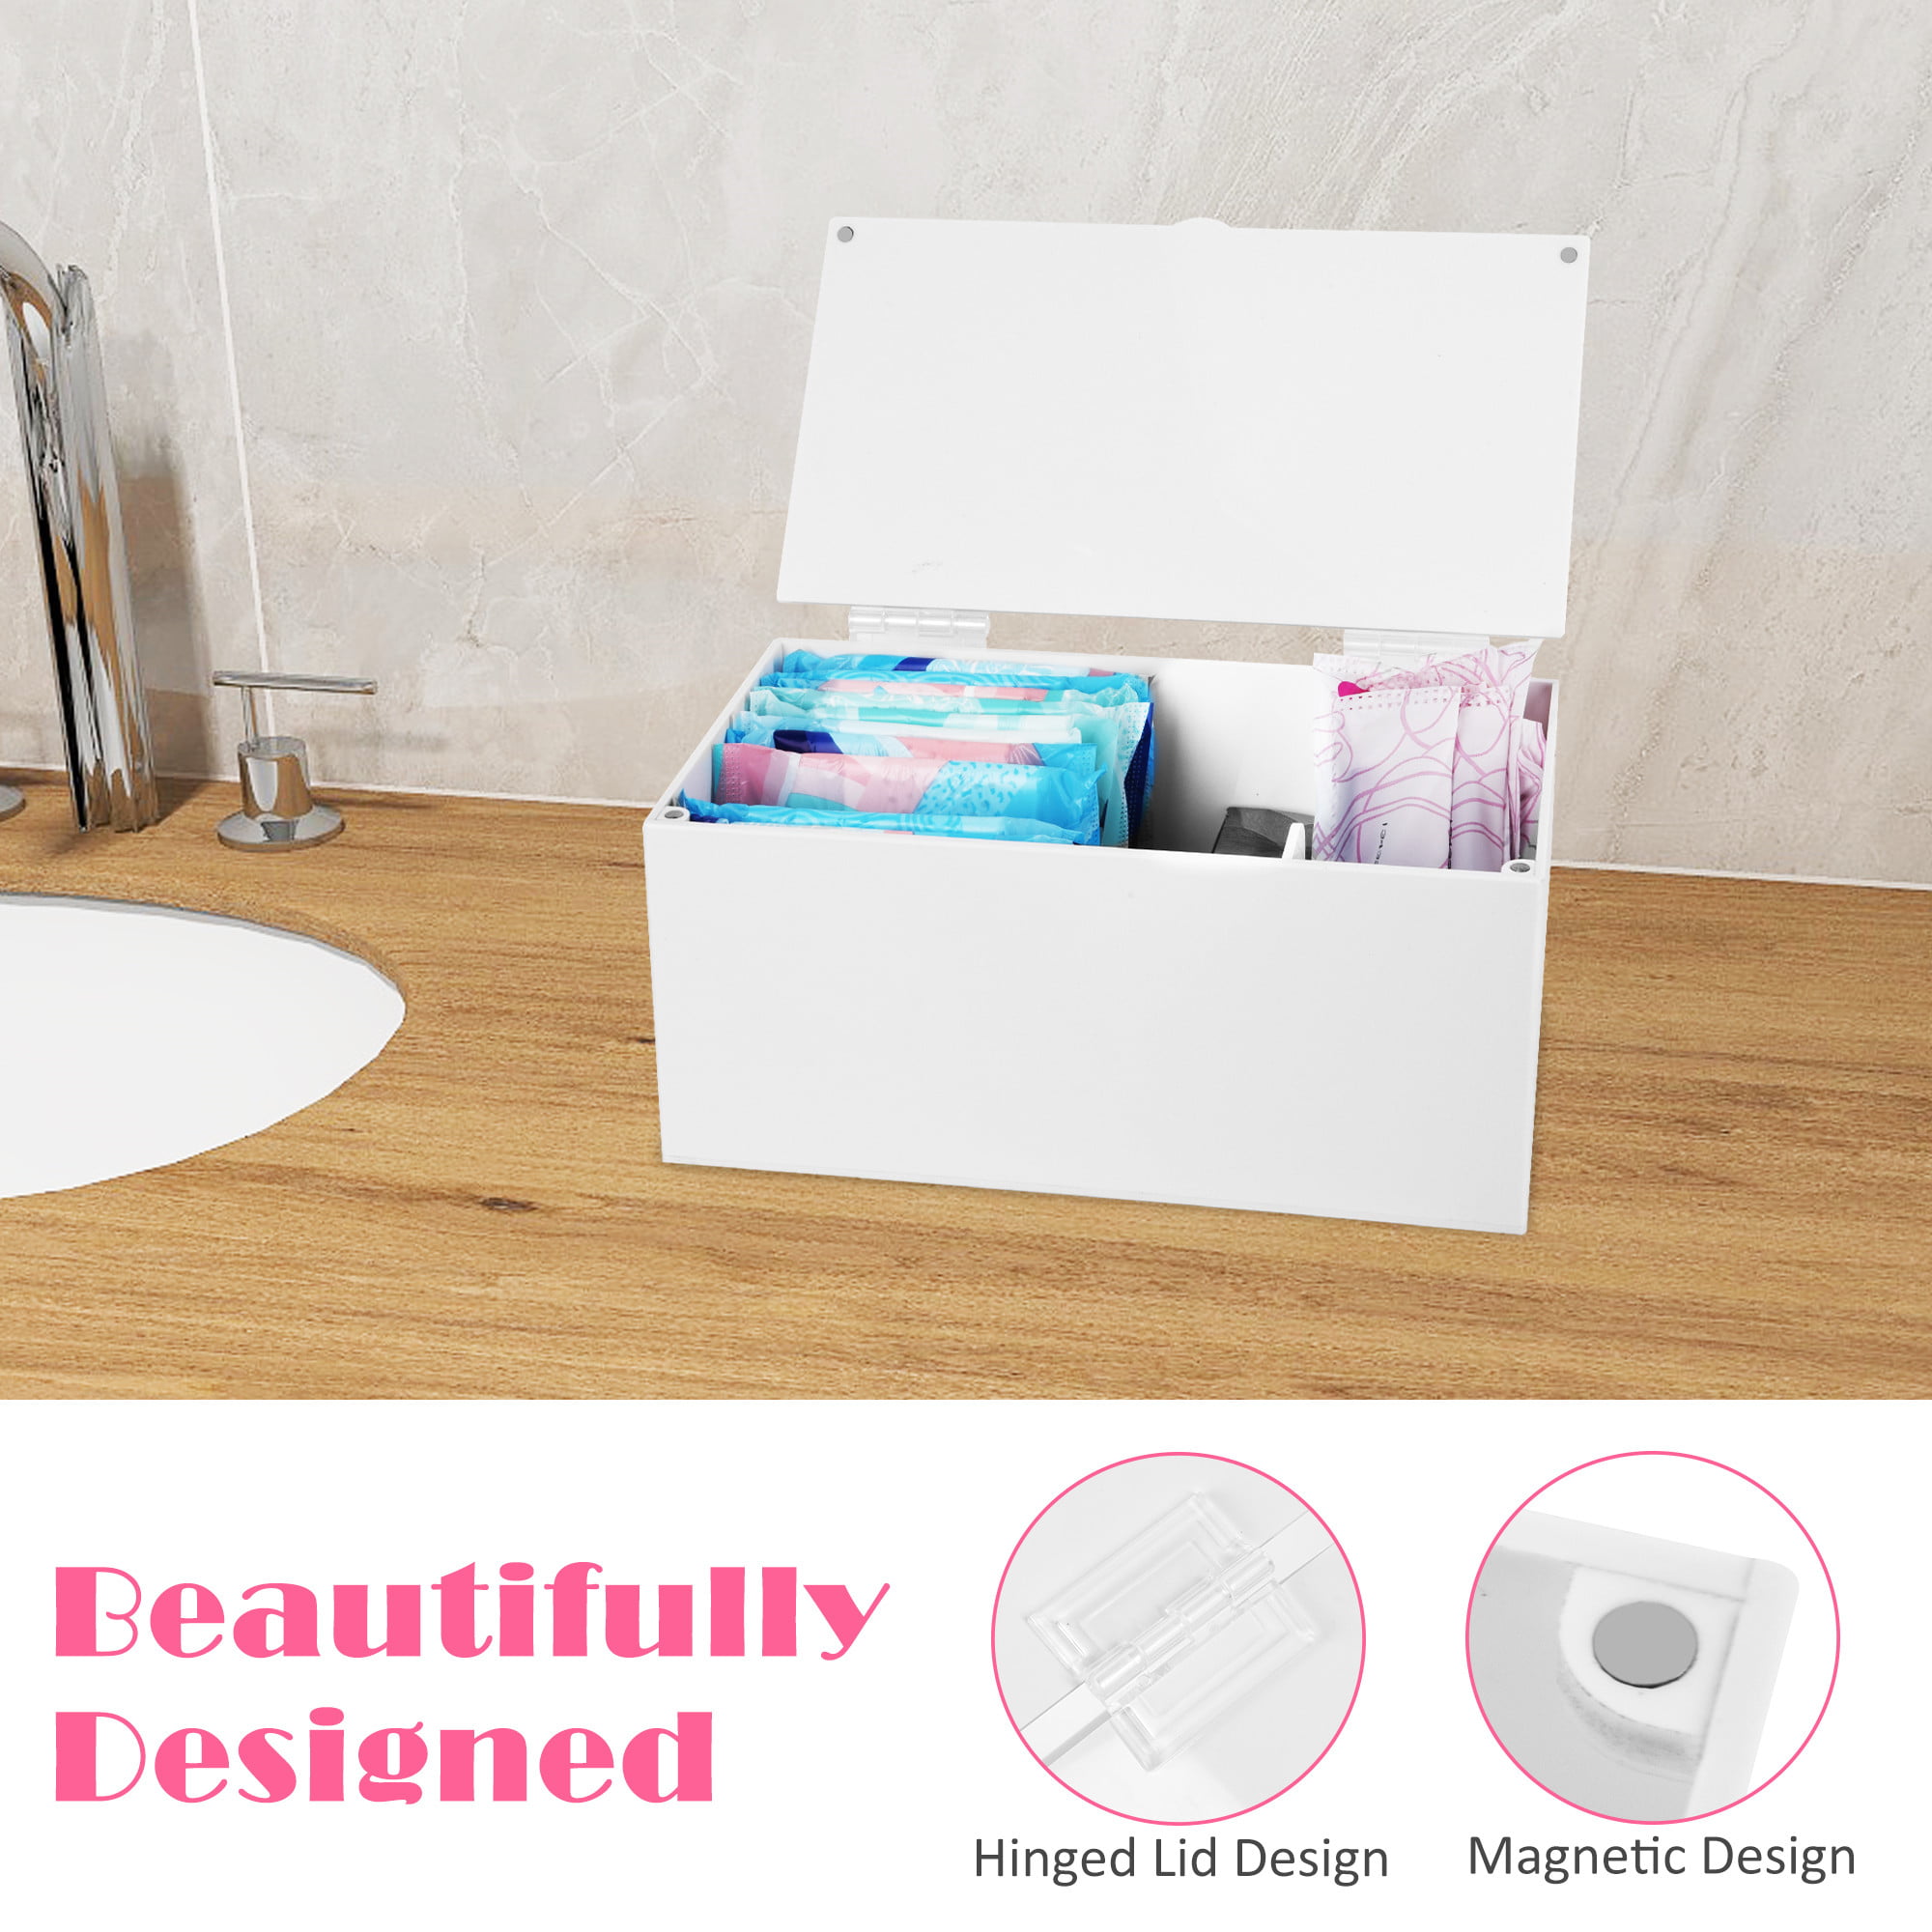 Tampon Holder, Acrylic Tampon Dispenser for Period, Tampon Holder for Women  Bathroom, Tampon Holder for Purse, Tampon Organizer, White